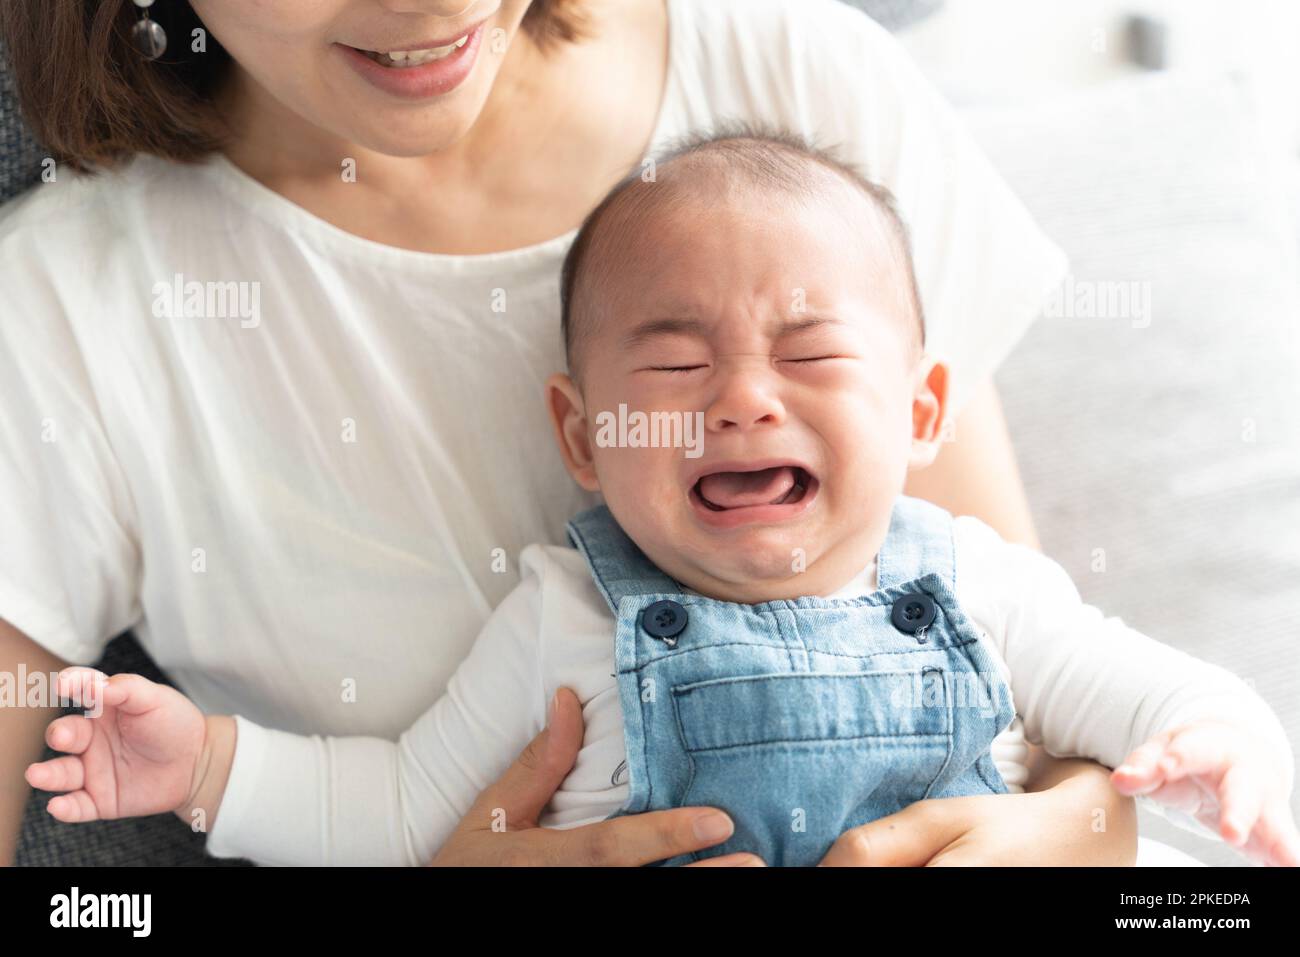 Baby crying in mother's arms Stock Photo